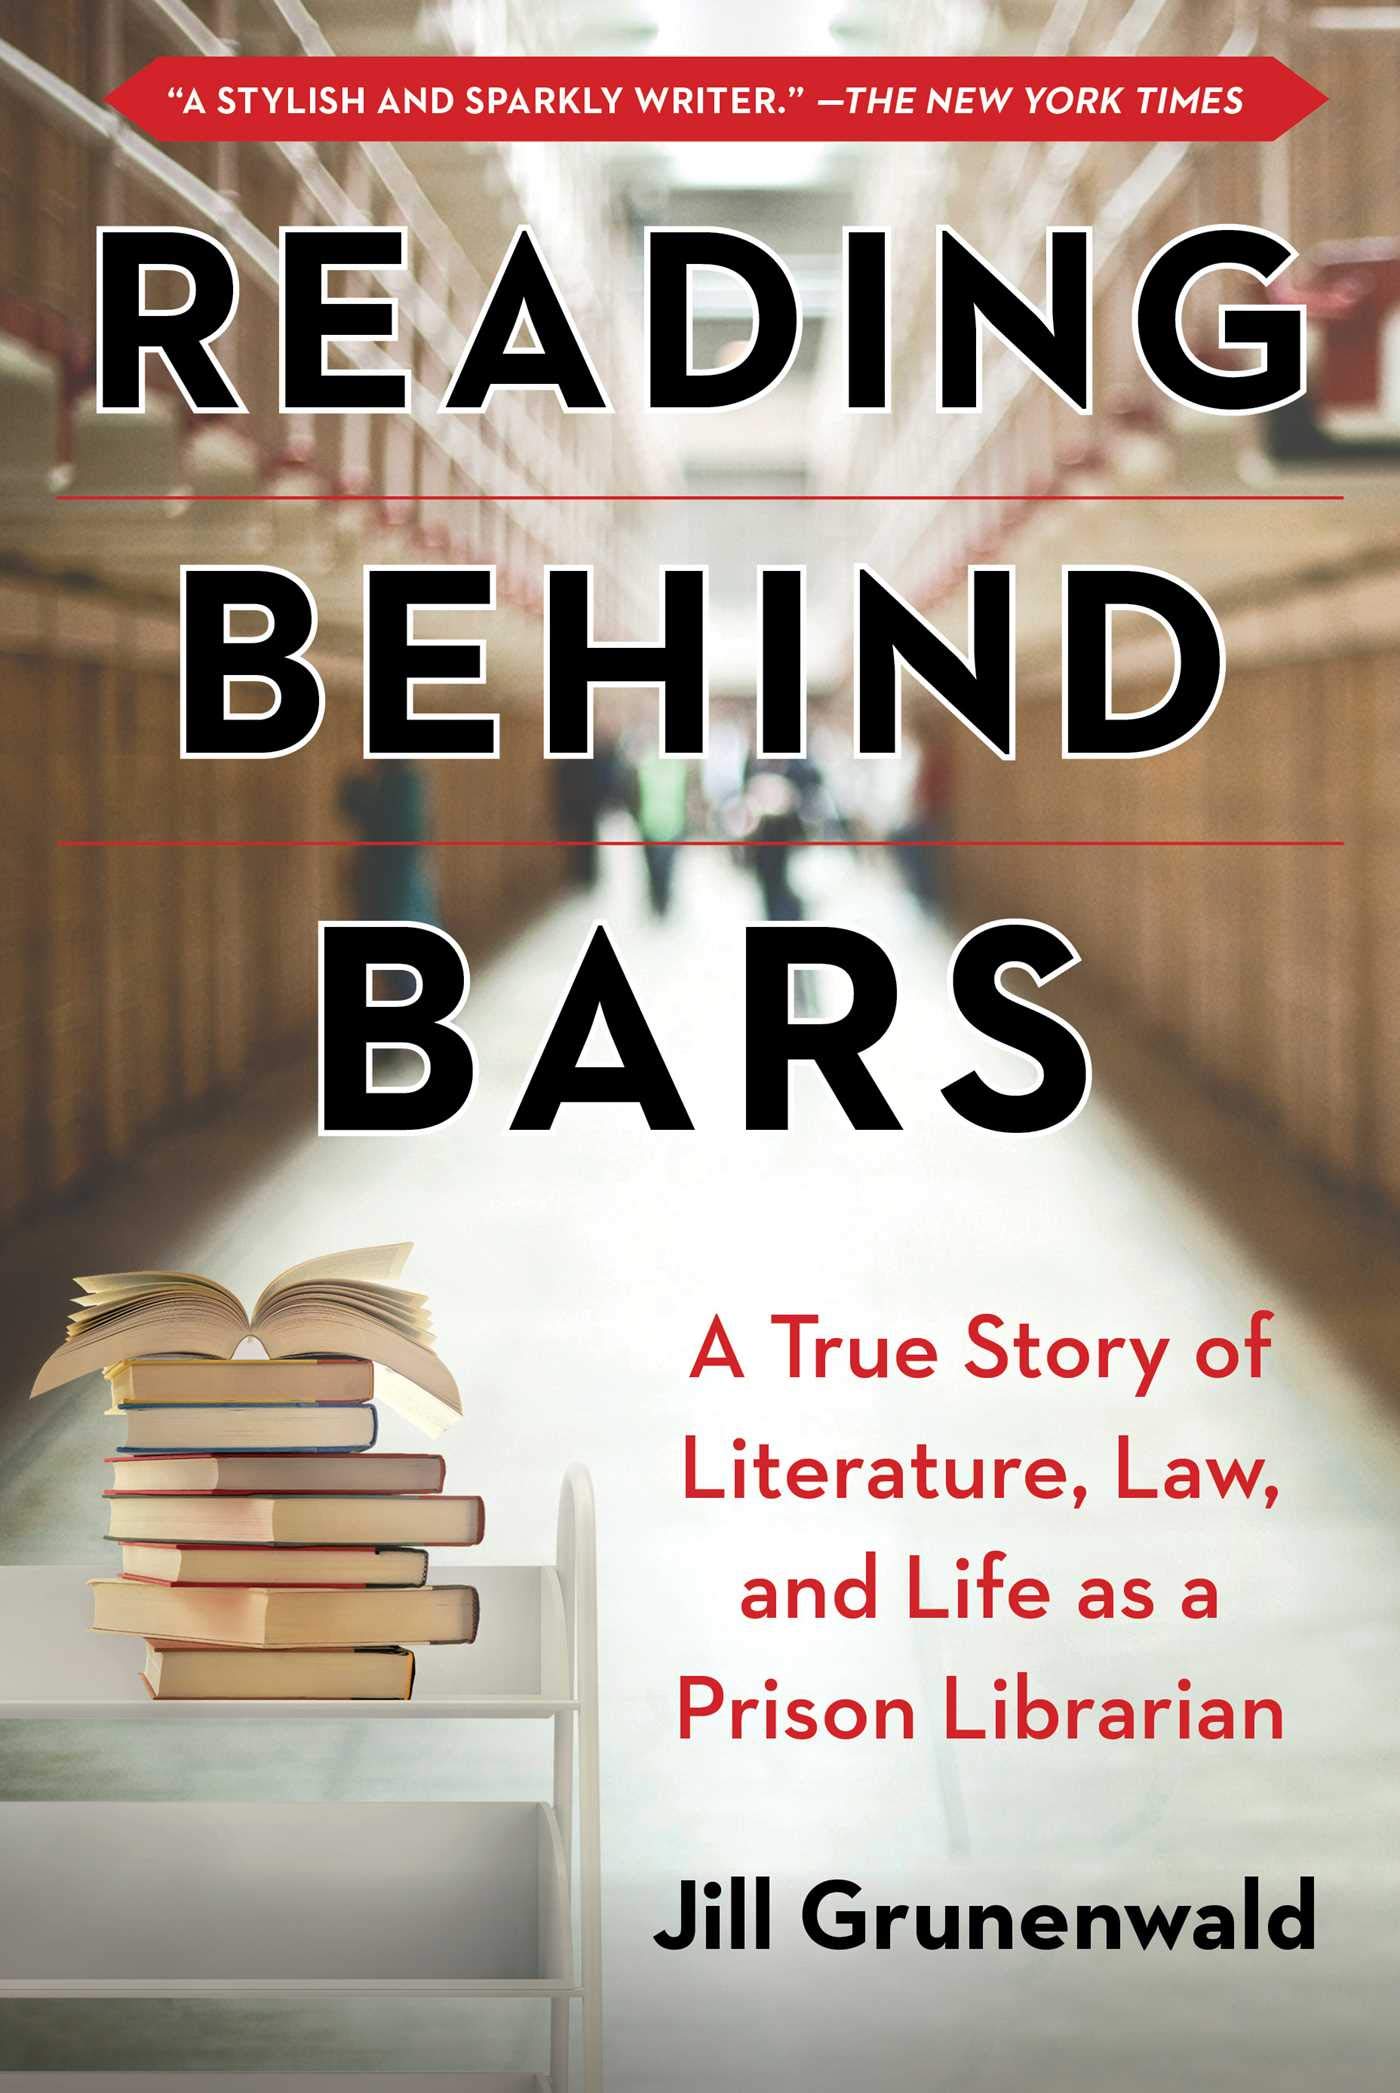 Reading Behind Bars: A Memoir of Literature, Law, and Life as a Prison Librarian